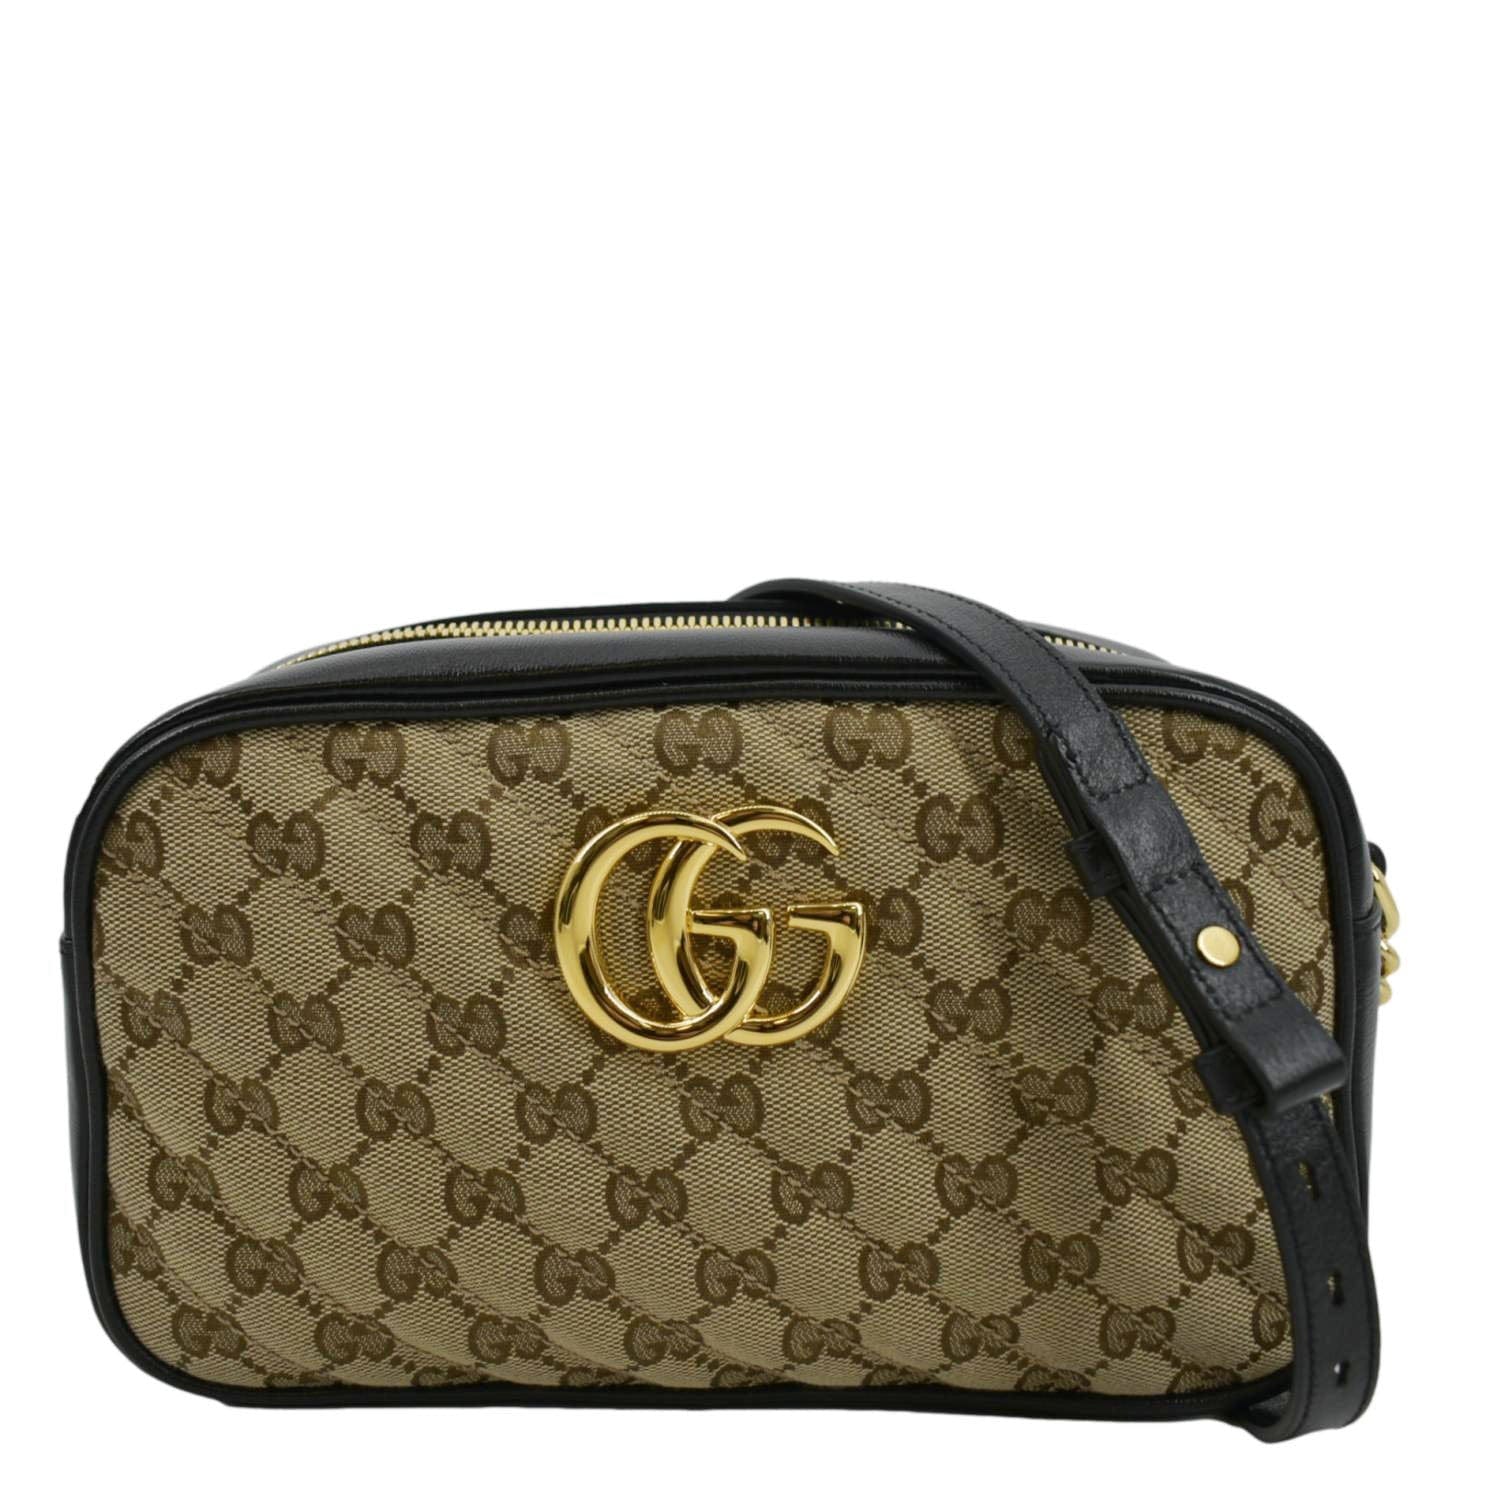 Gucci Marmont GG Small Shoulder Bag